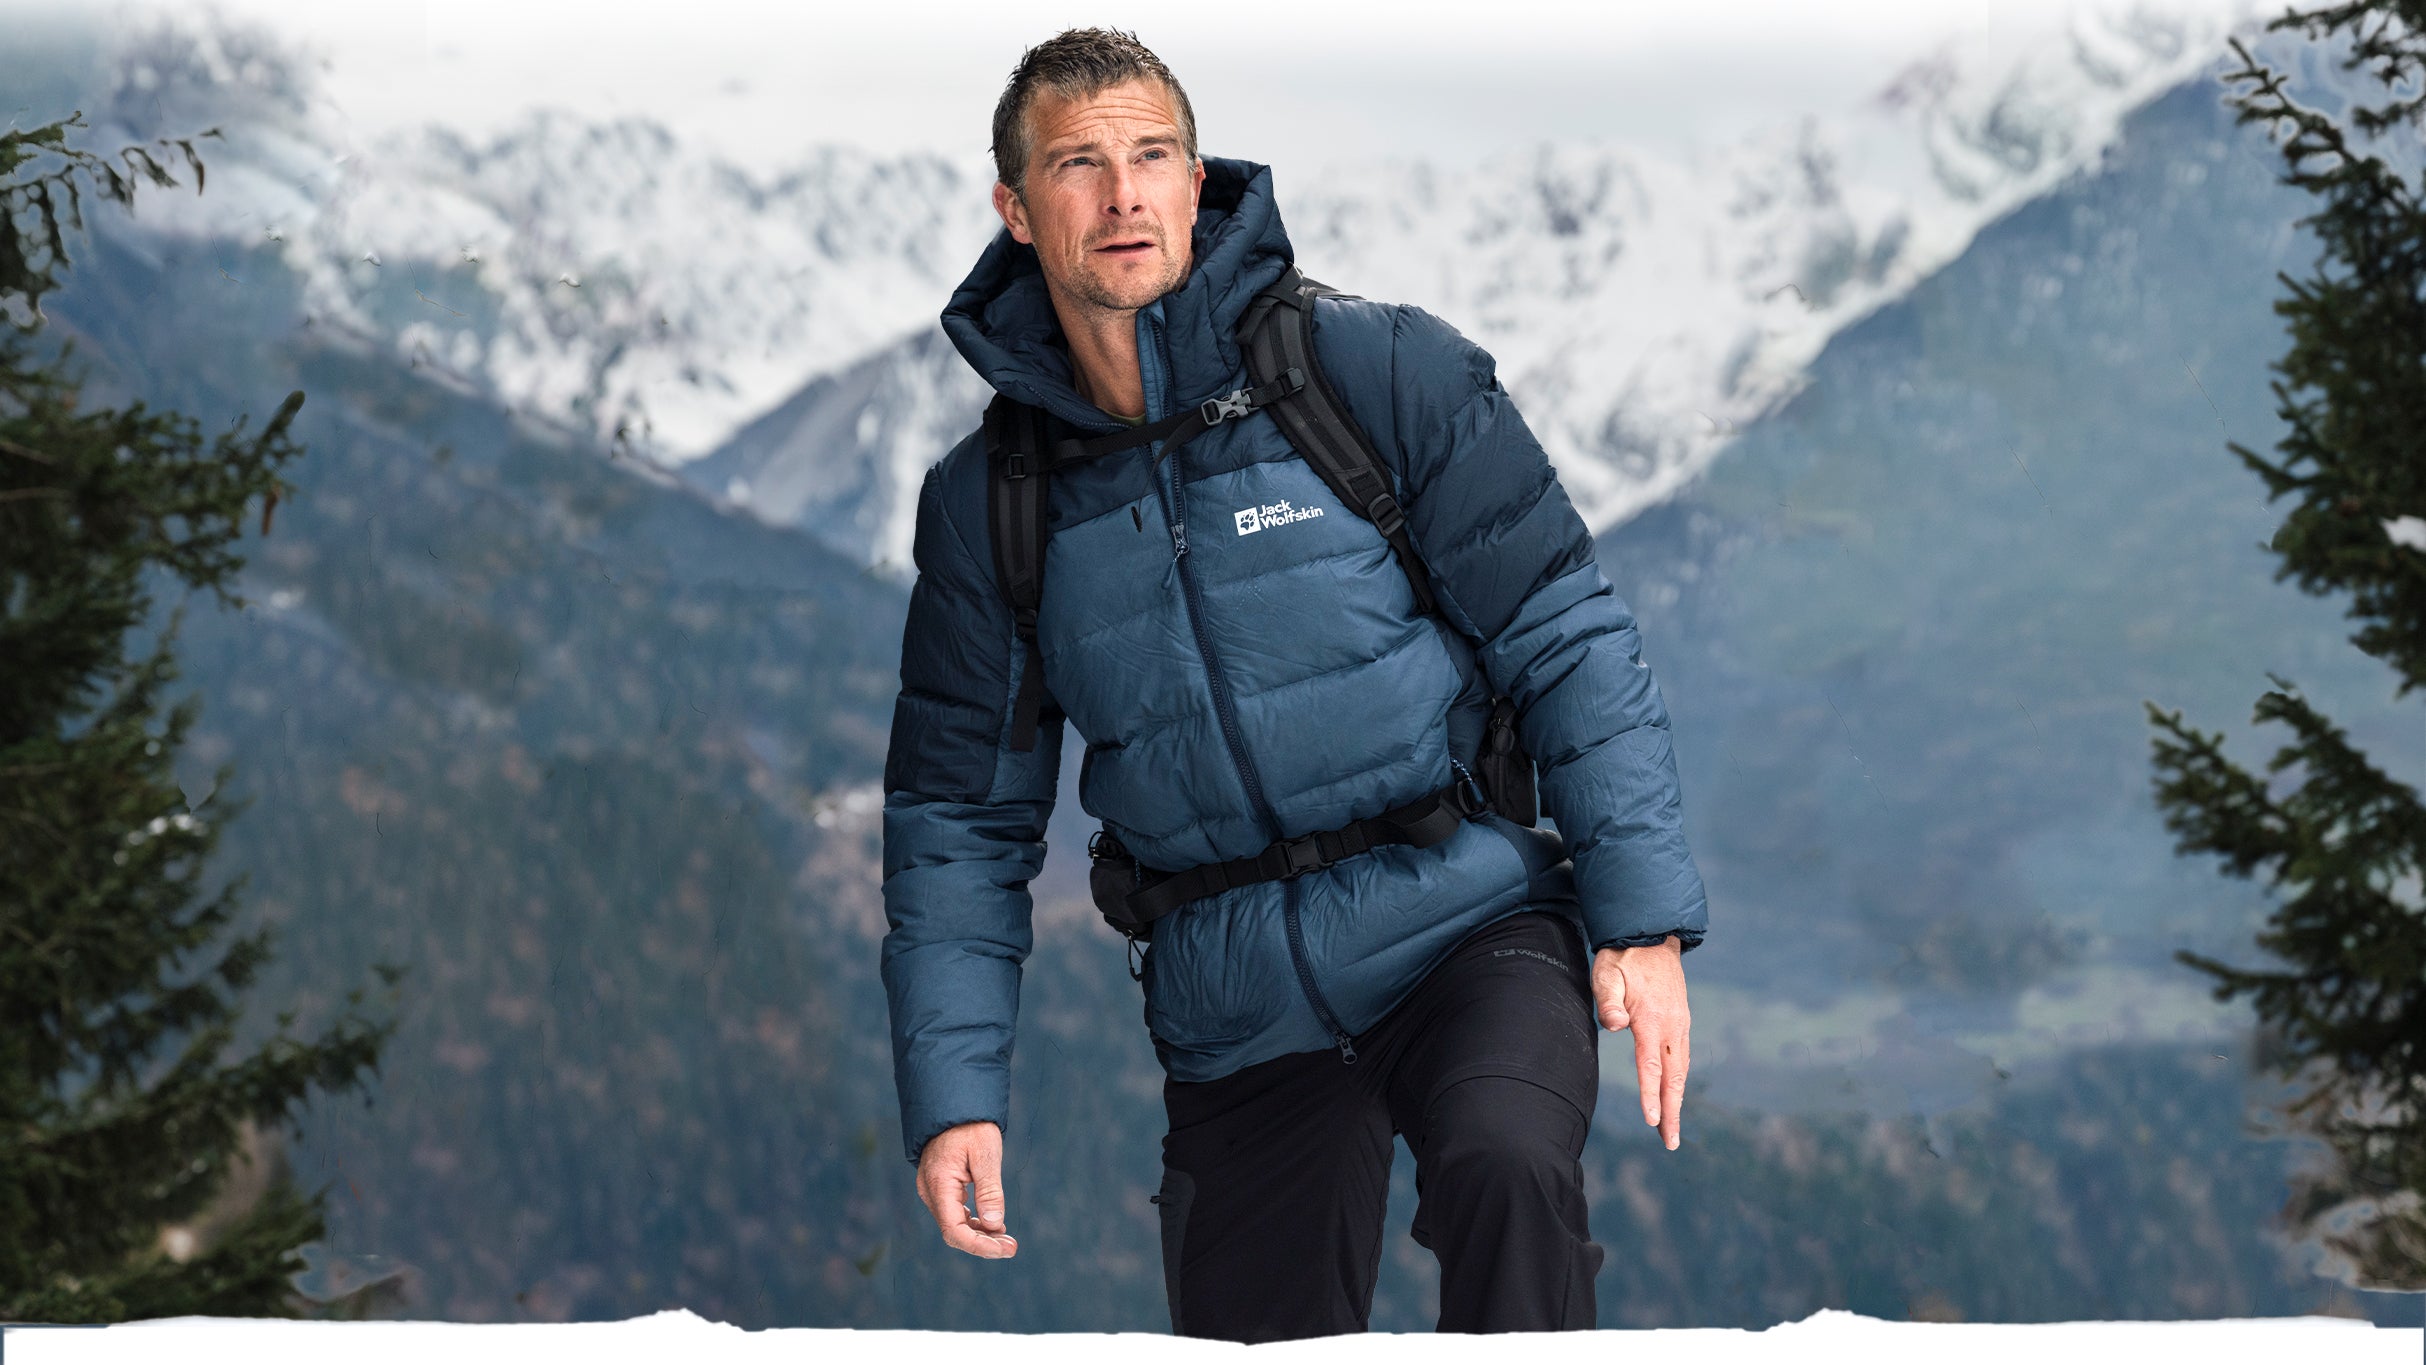 Bear Grylls: Never Give Up Tour in South Wharf promo photo for Exclusive presale offer code